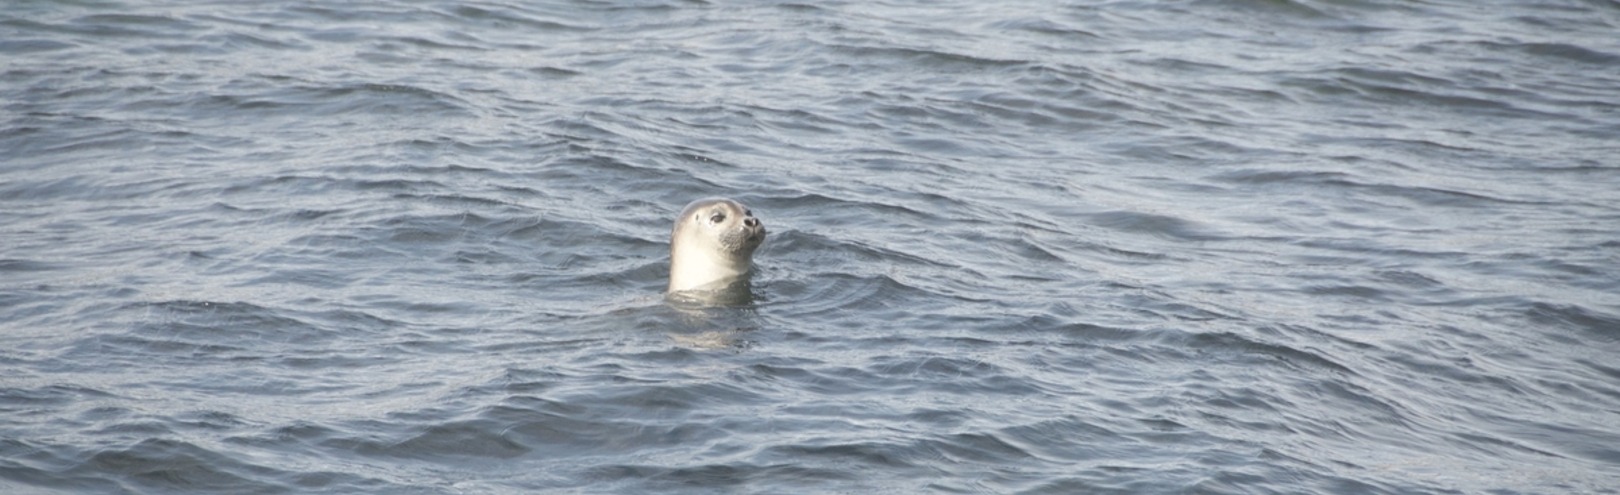 Are Icelandic harbour seals acoustically cryptic to avoid predation during mating season? - Available at University of Iceland